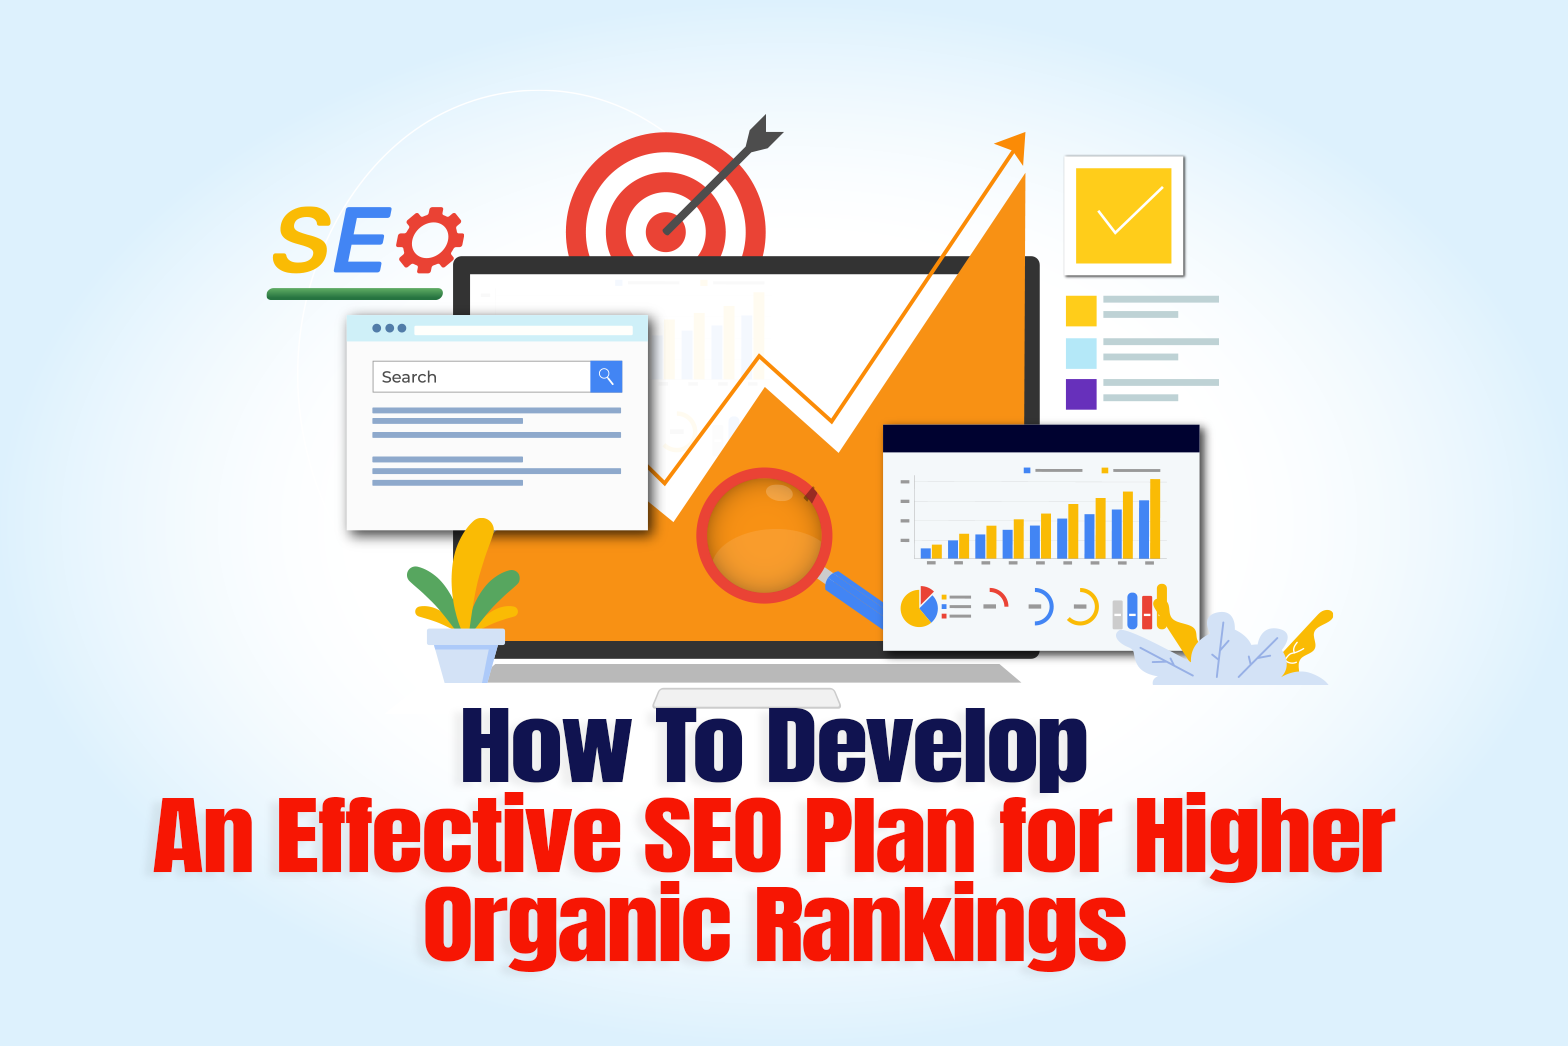 How to Develop an Effective SEO Plan for Higher Organic Rankings?